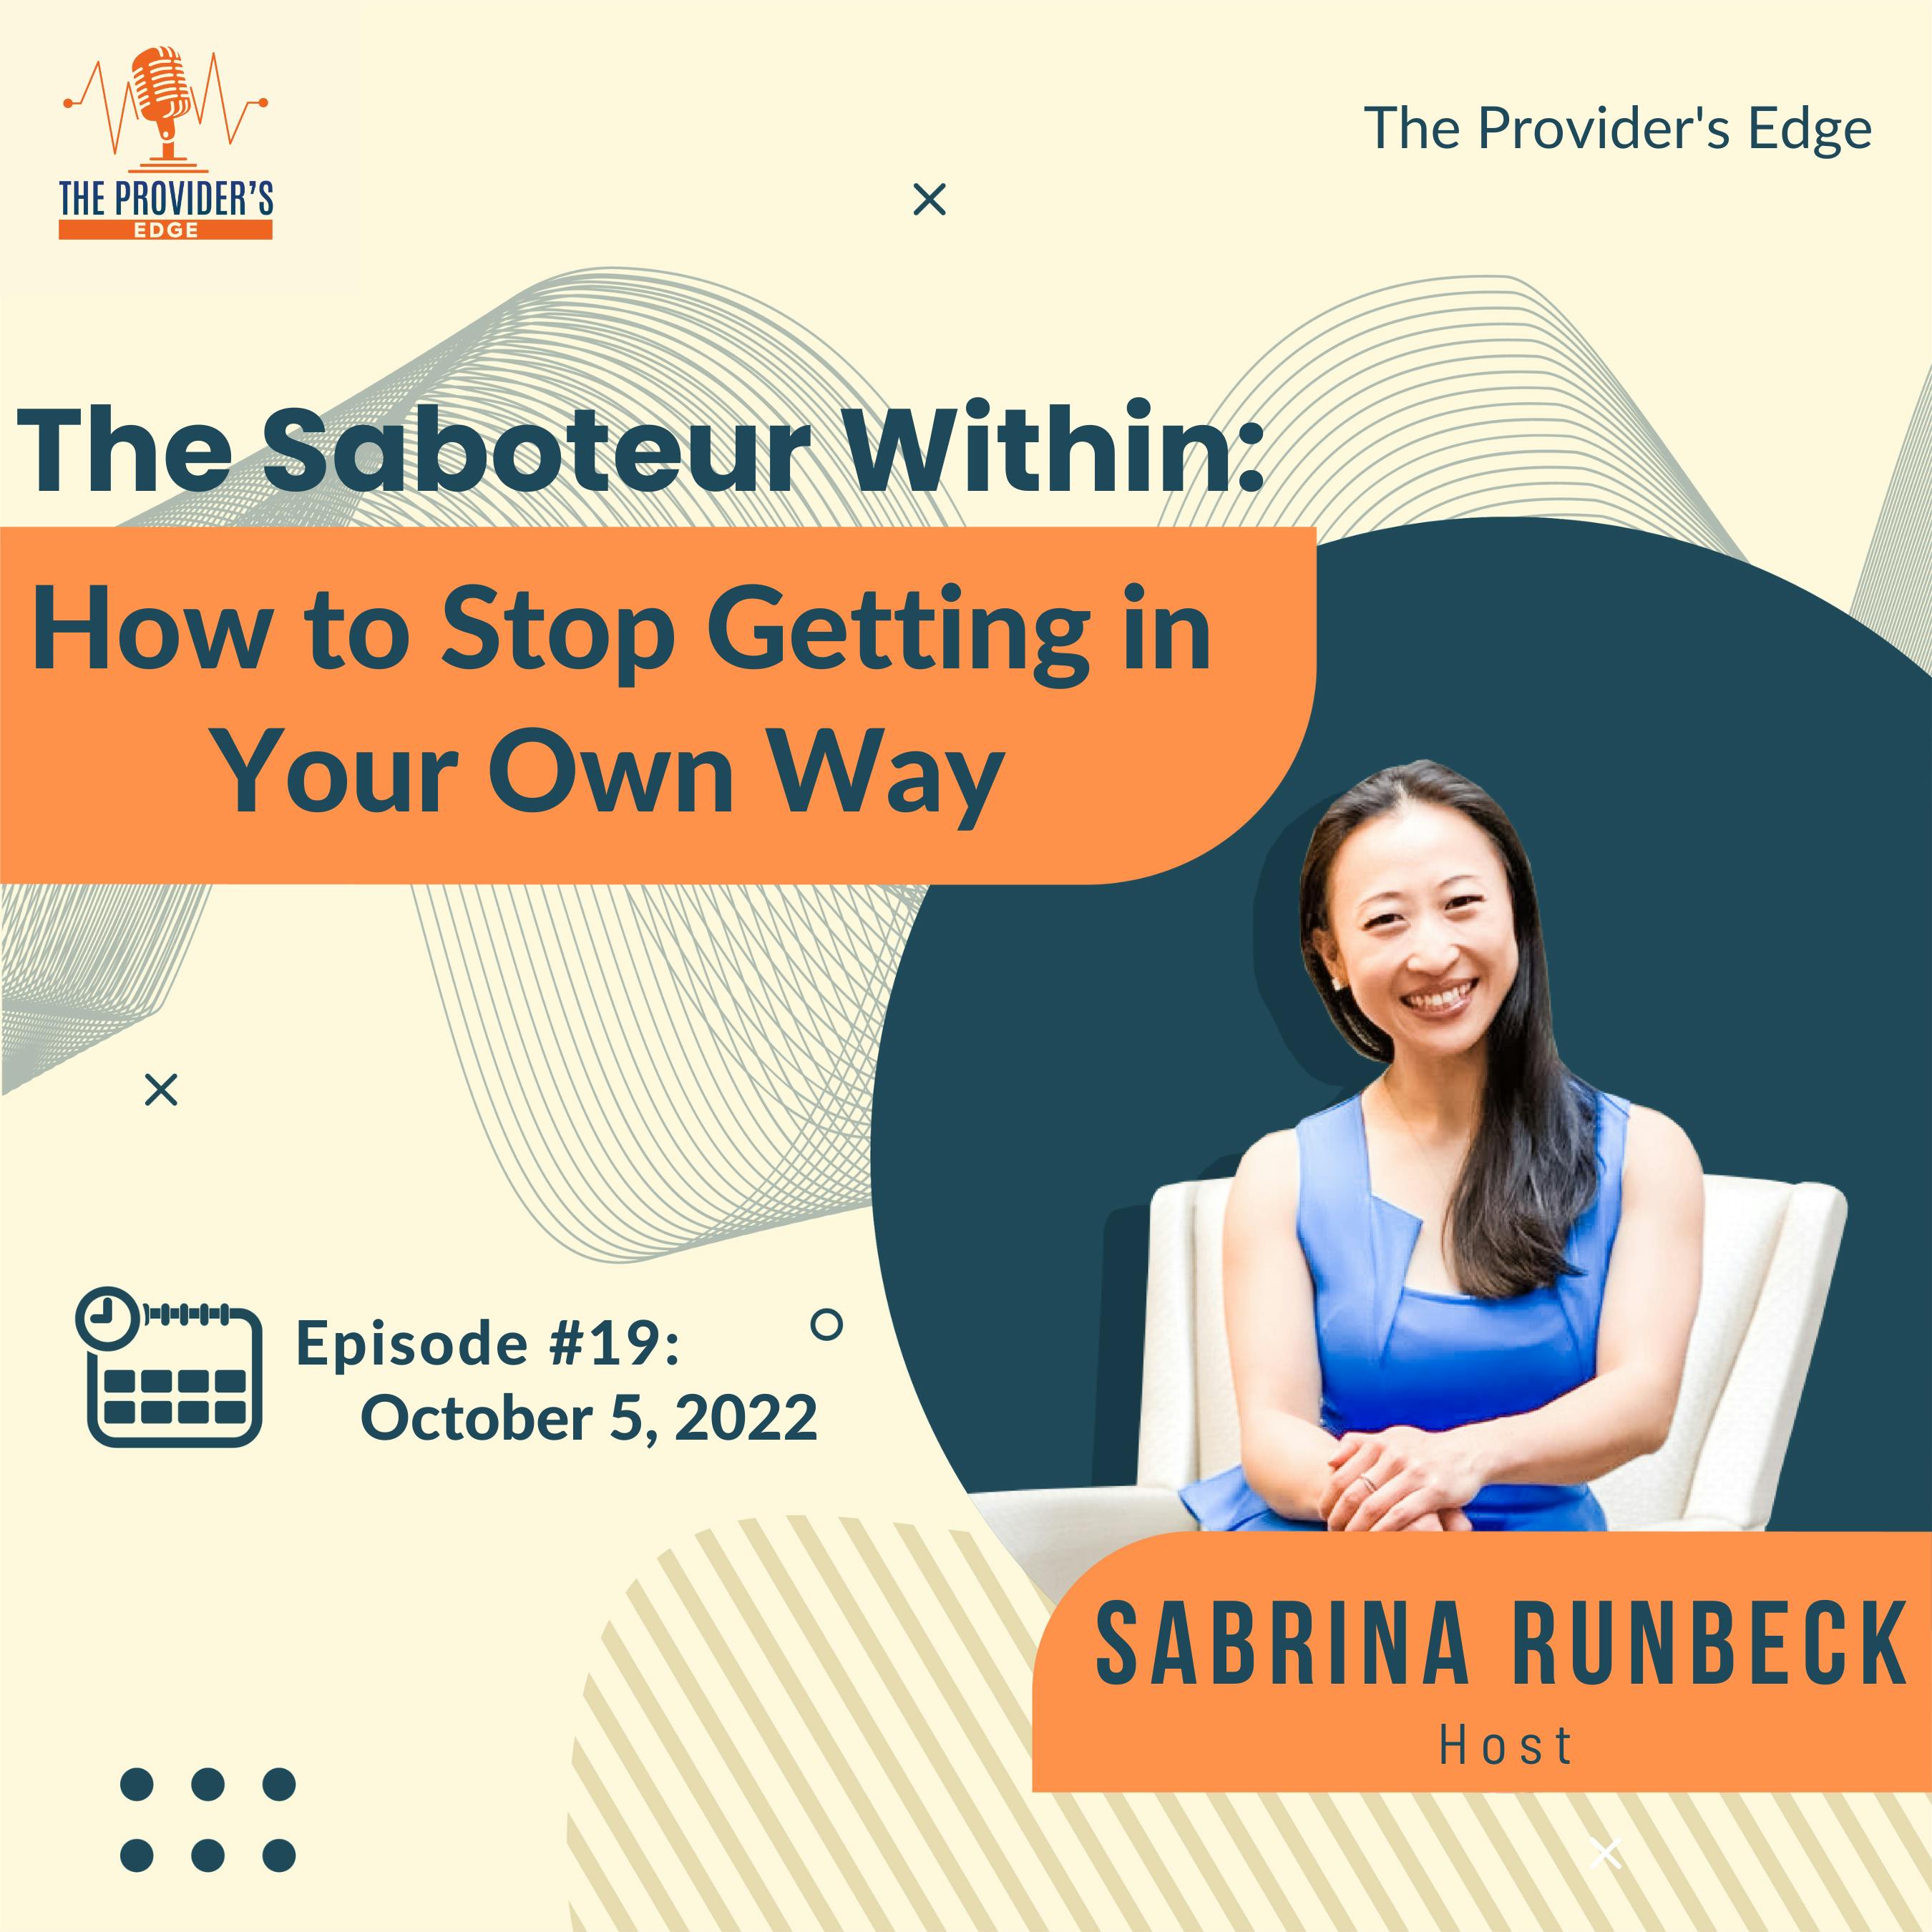 The Saboteur Within: How to Stop Getting in Your Own Way